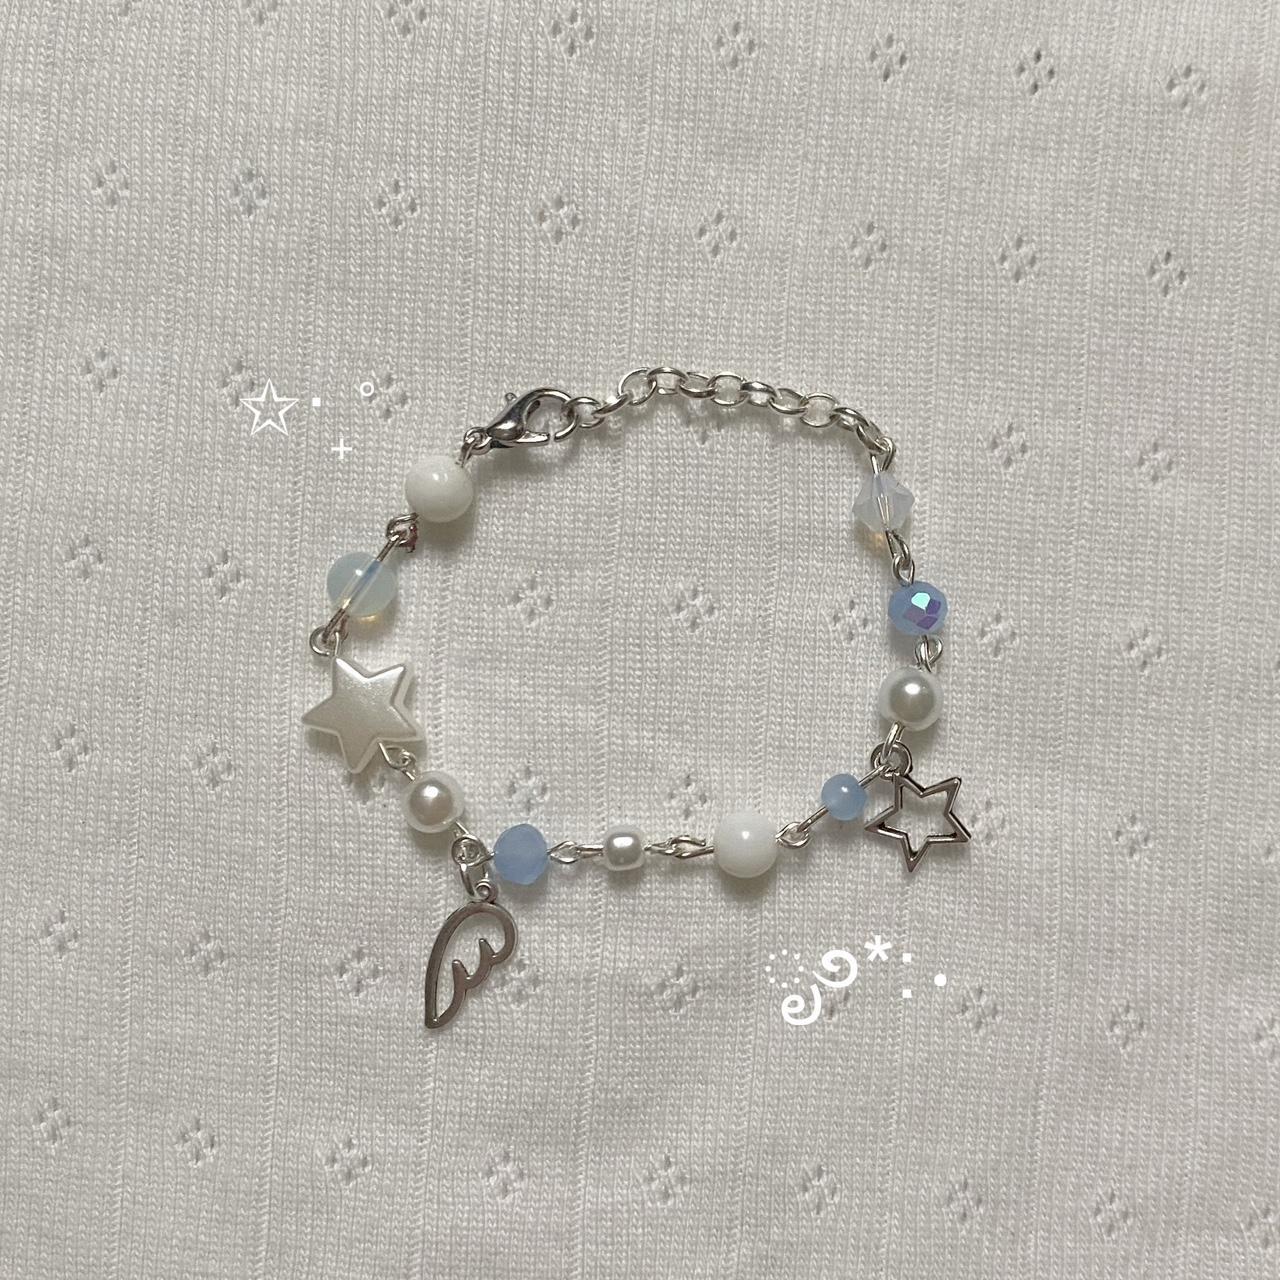 Wave to earth inspired bracelet ୨୧⋆｡˚ ☁️ 7 in and... - Depop